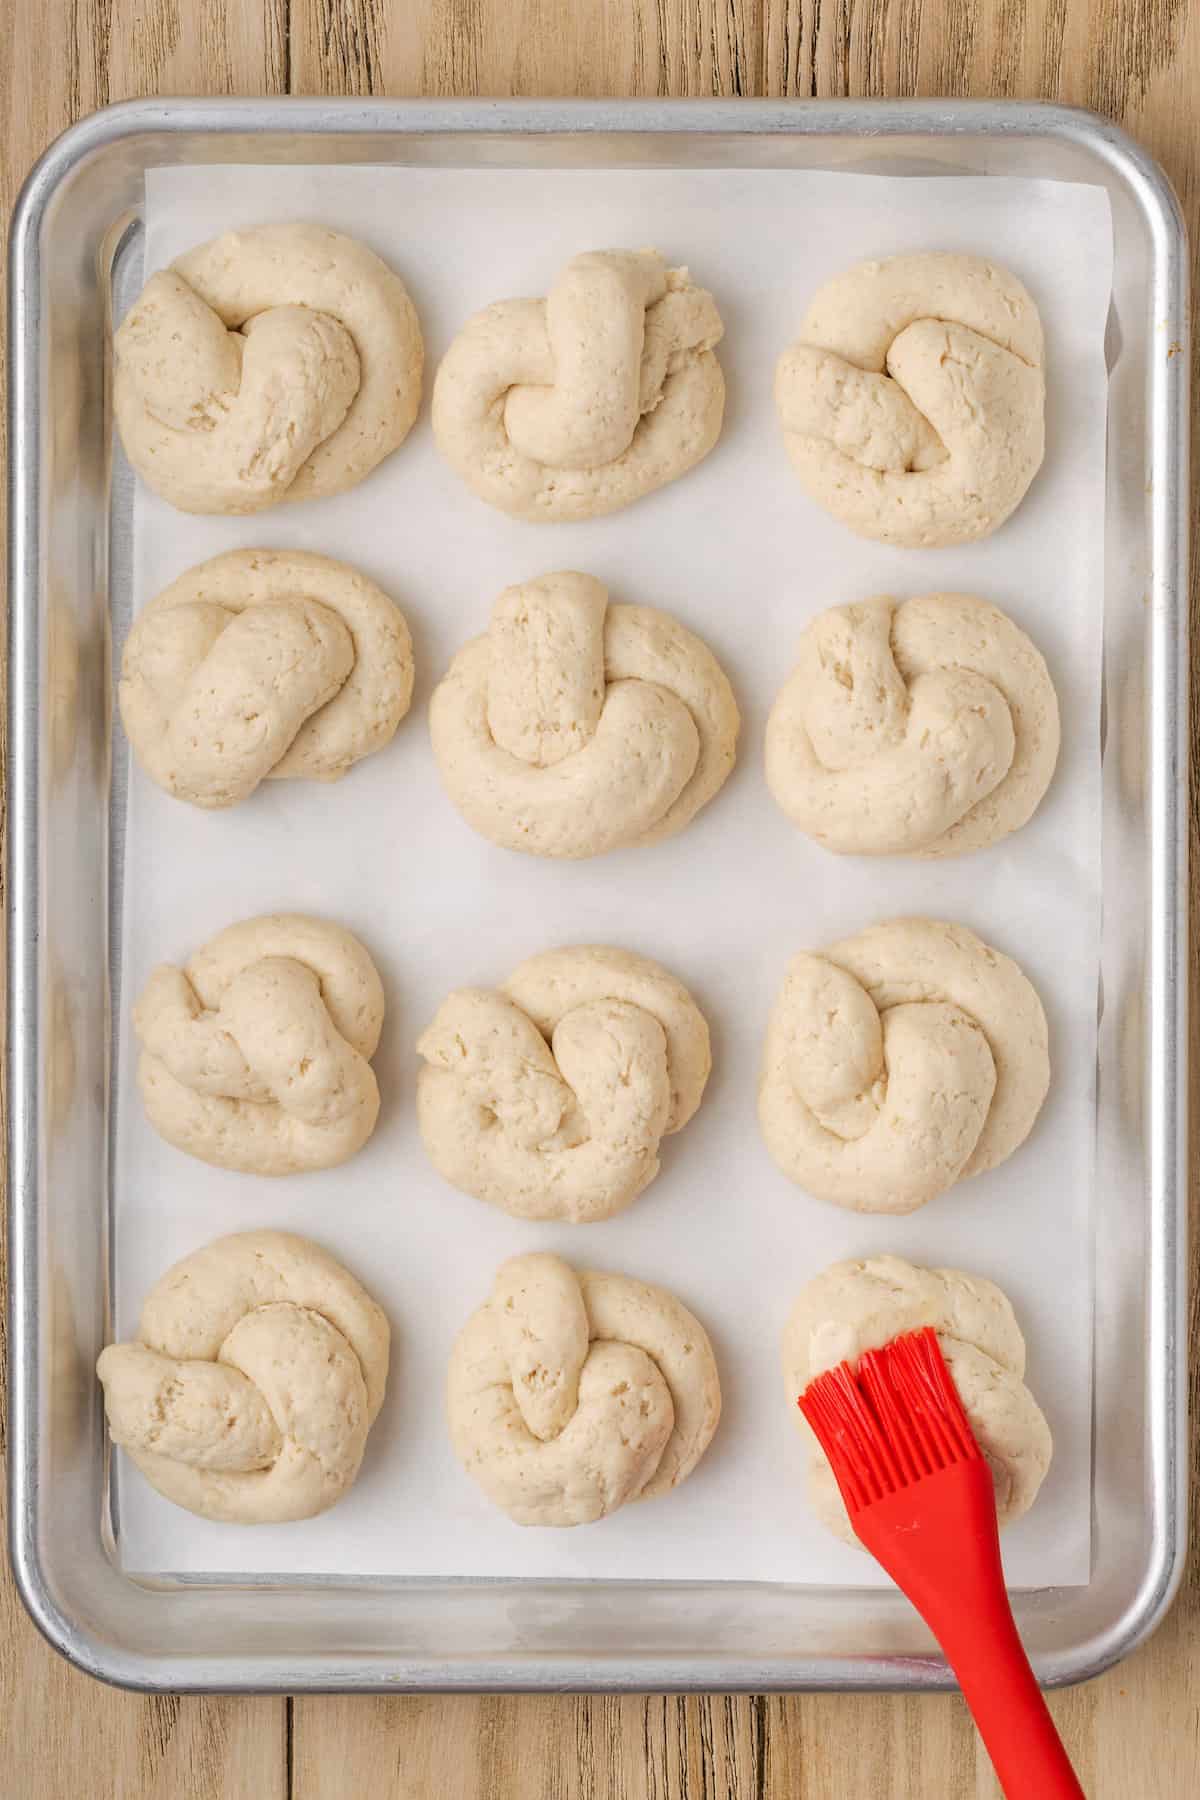 Unbaked gluten-free garlic knots on a baking sheet are brushed with melted butter.